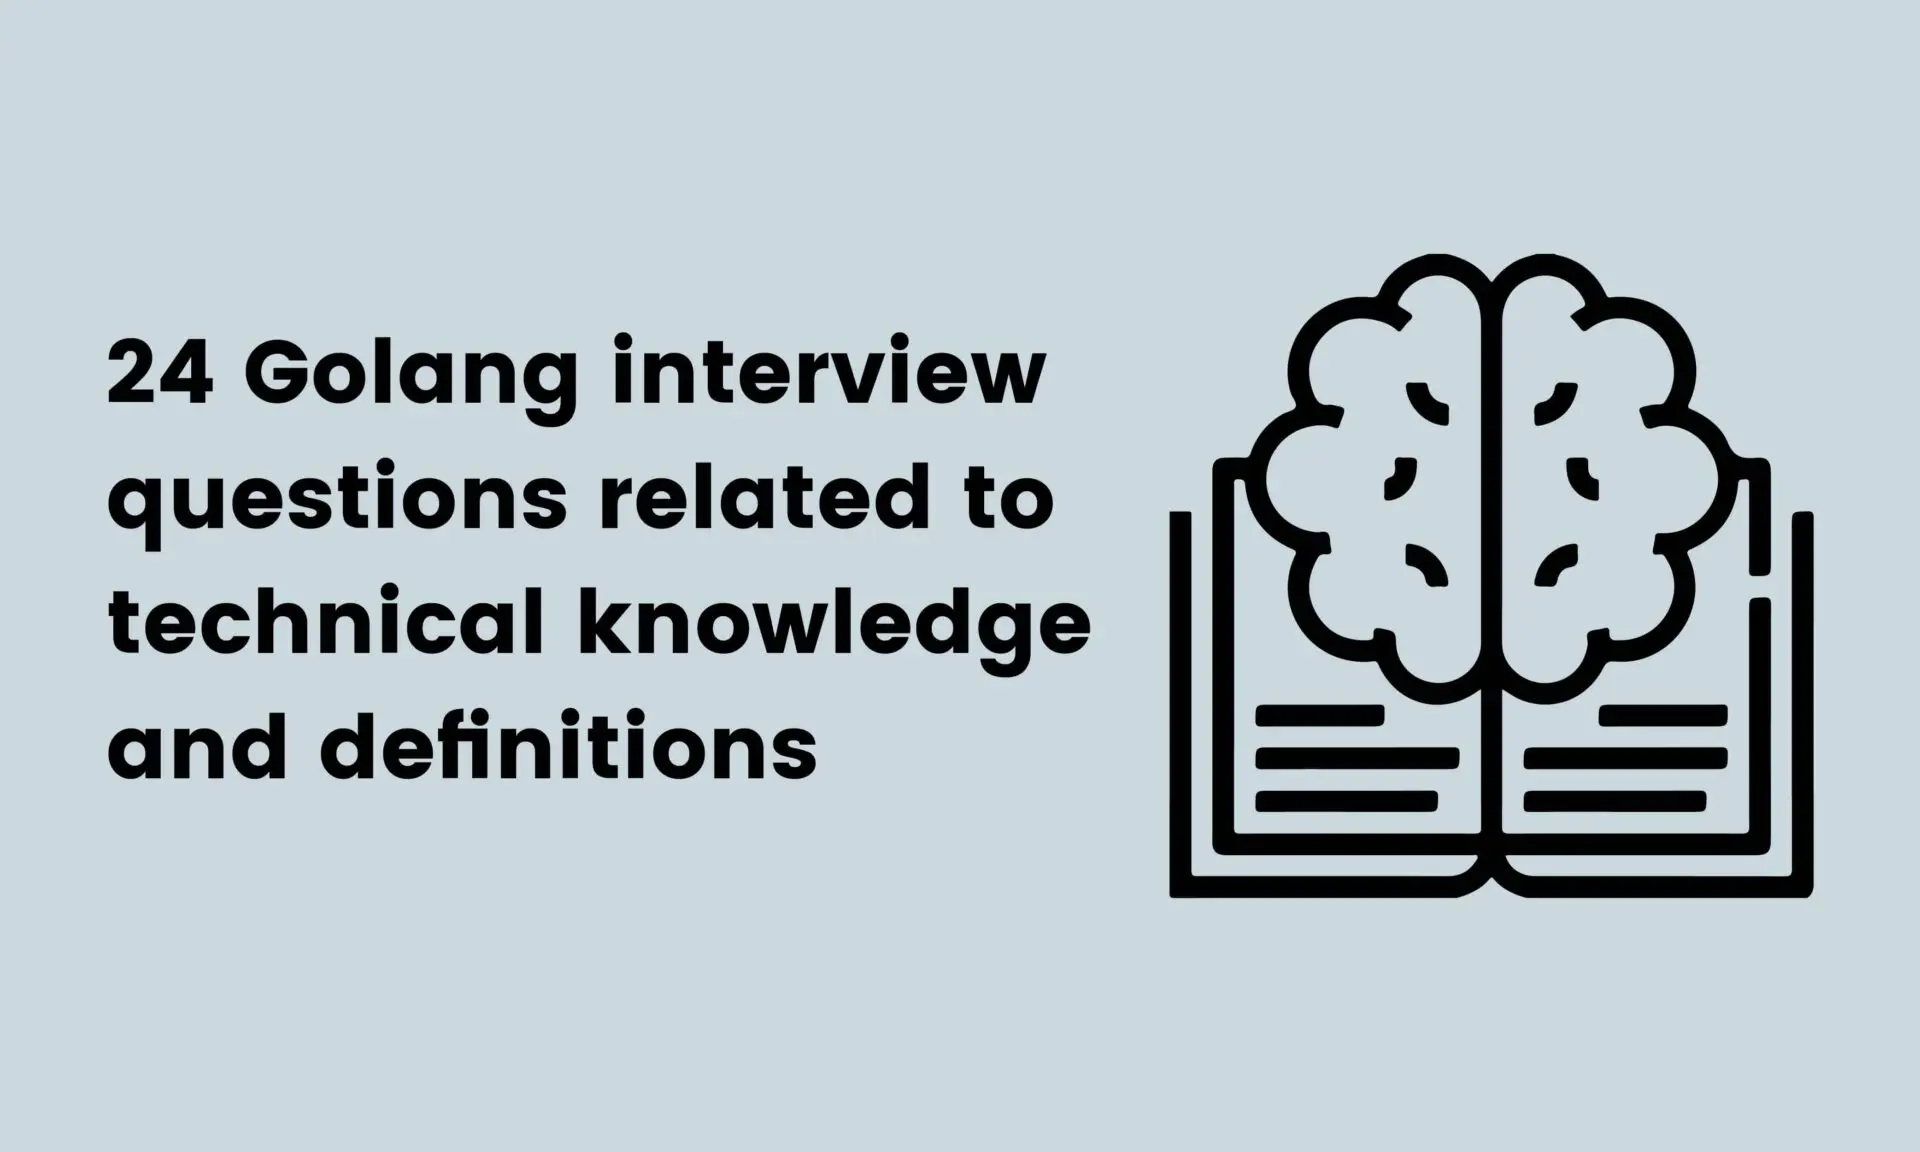 24 Golang interview questions related to technical knowledge and definitions